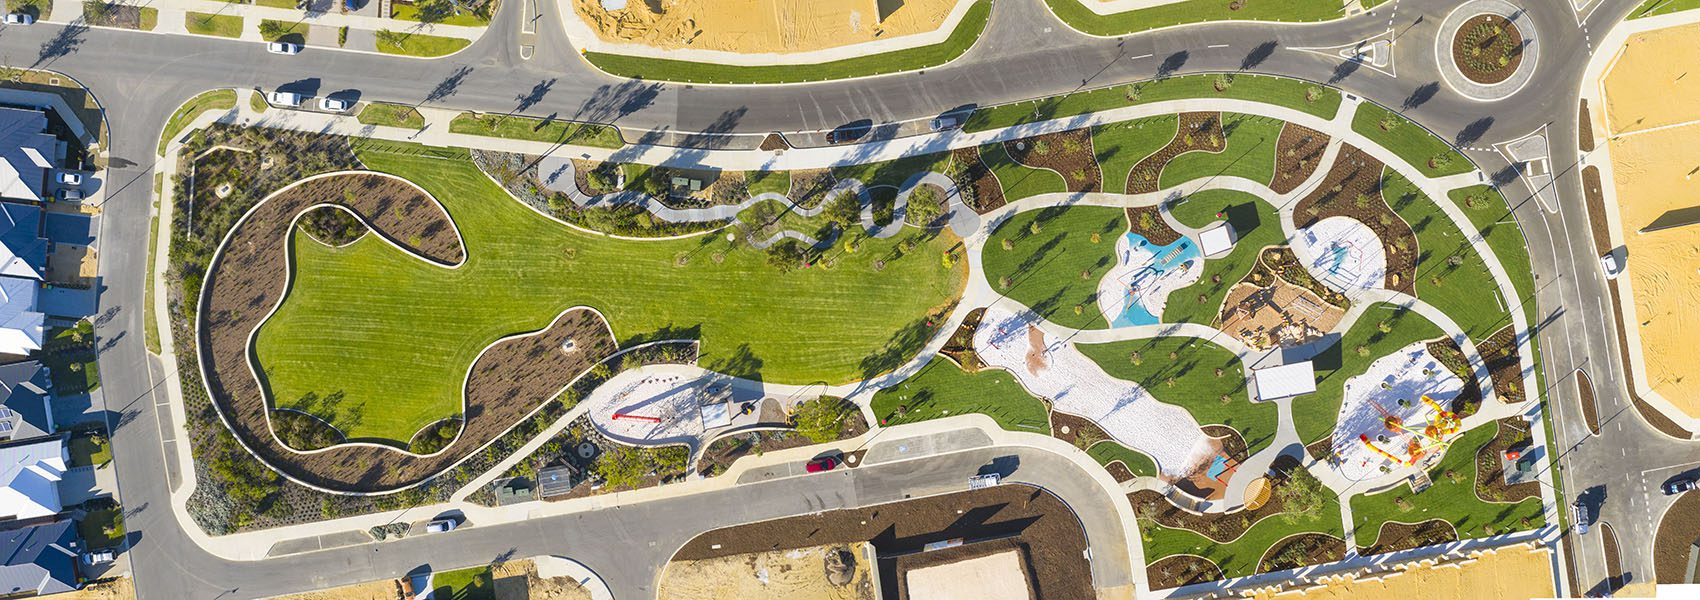 House and land packages are available in Move Homes near Brightwood Park. This is an aerial view of Brightwood Park, showing the bright green grass and fun equipment. There is so much running space.